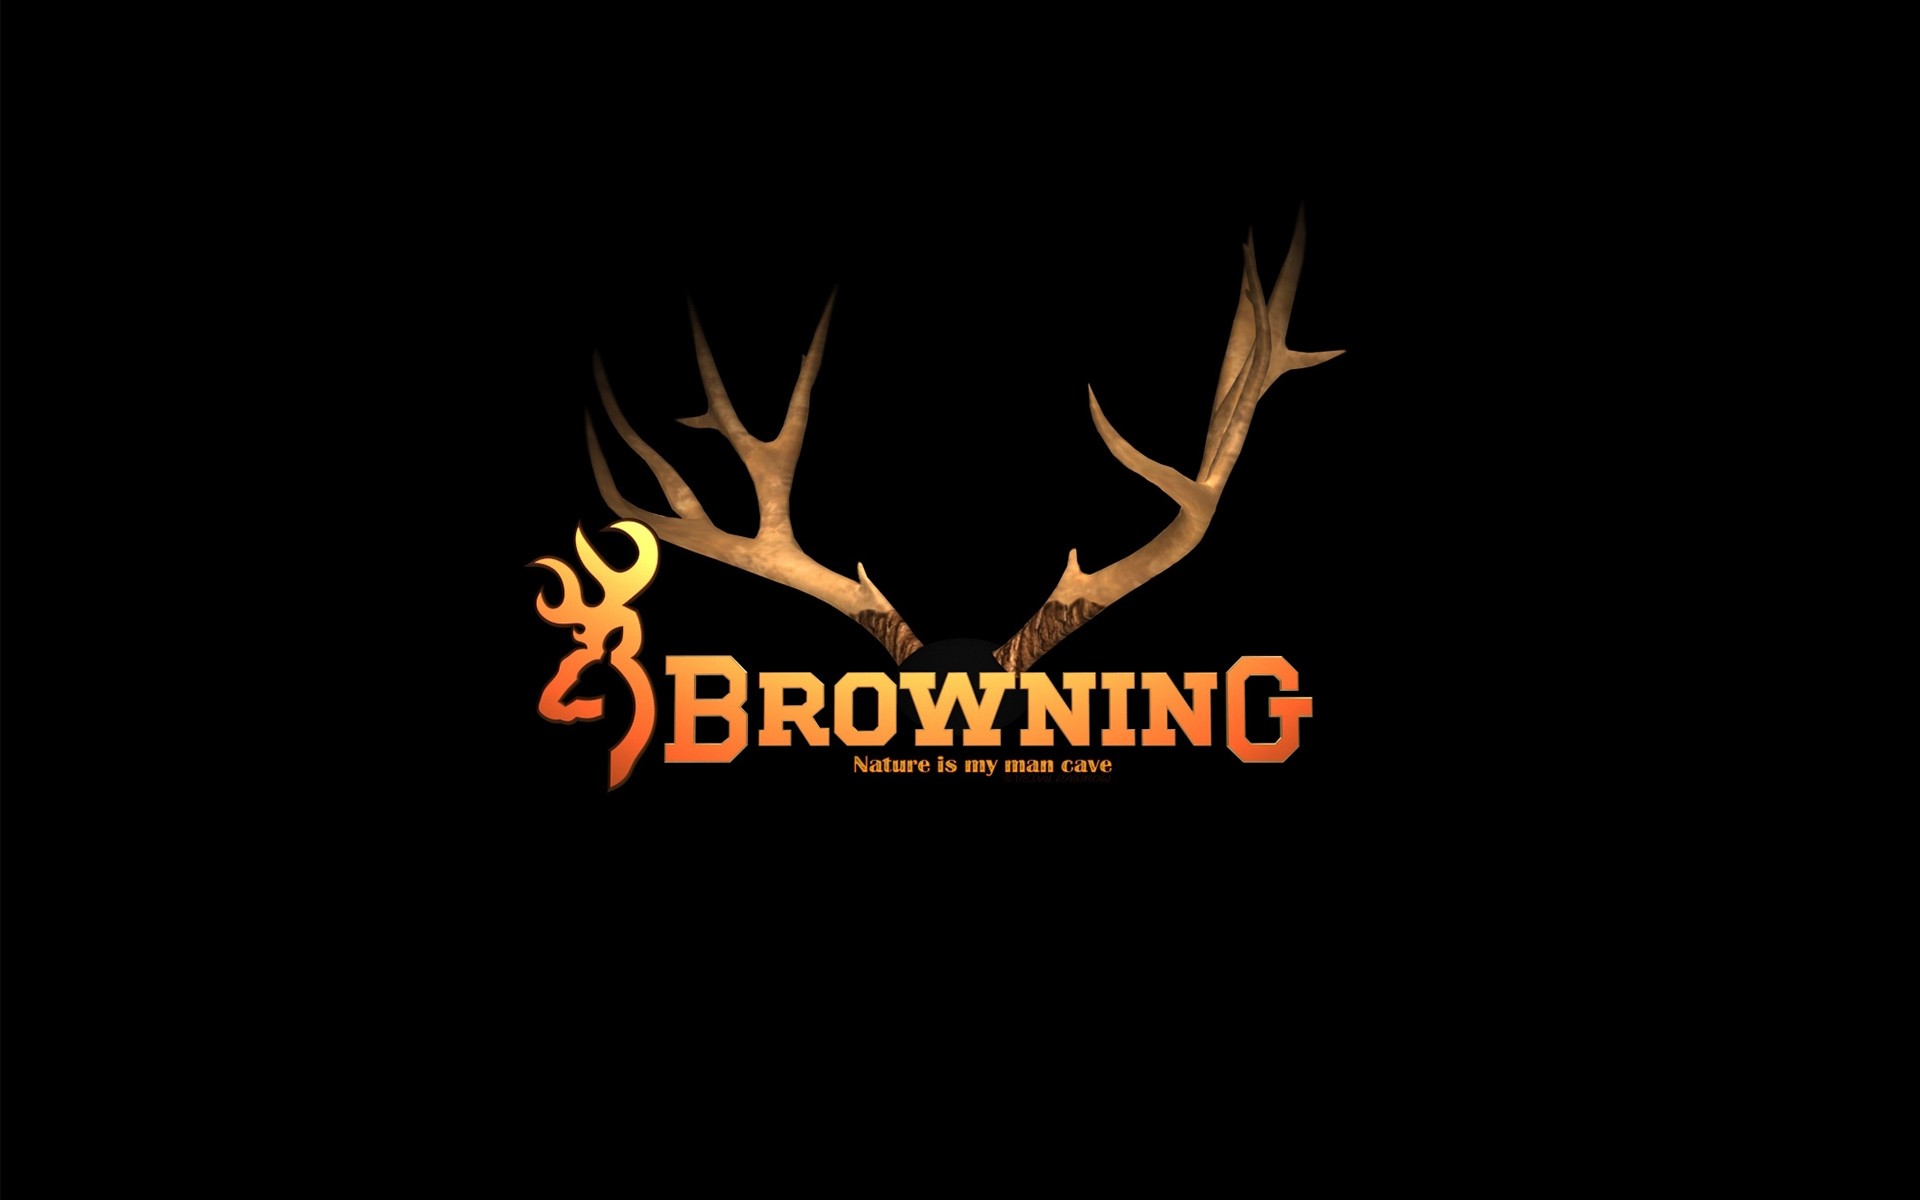 1920x1200 Browning Desktop Wallpaper Images & Pictures - Becuo